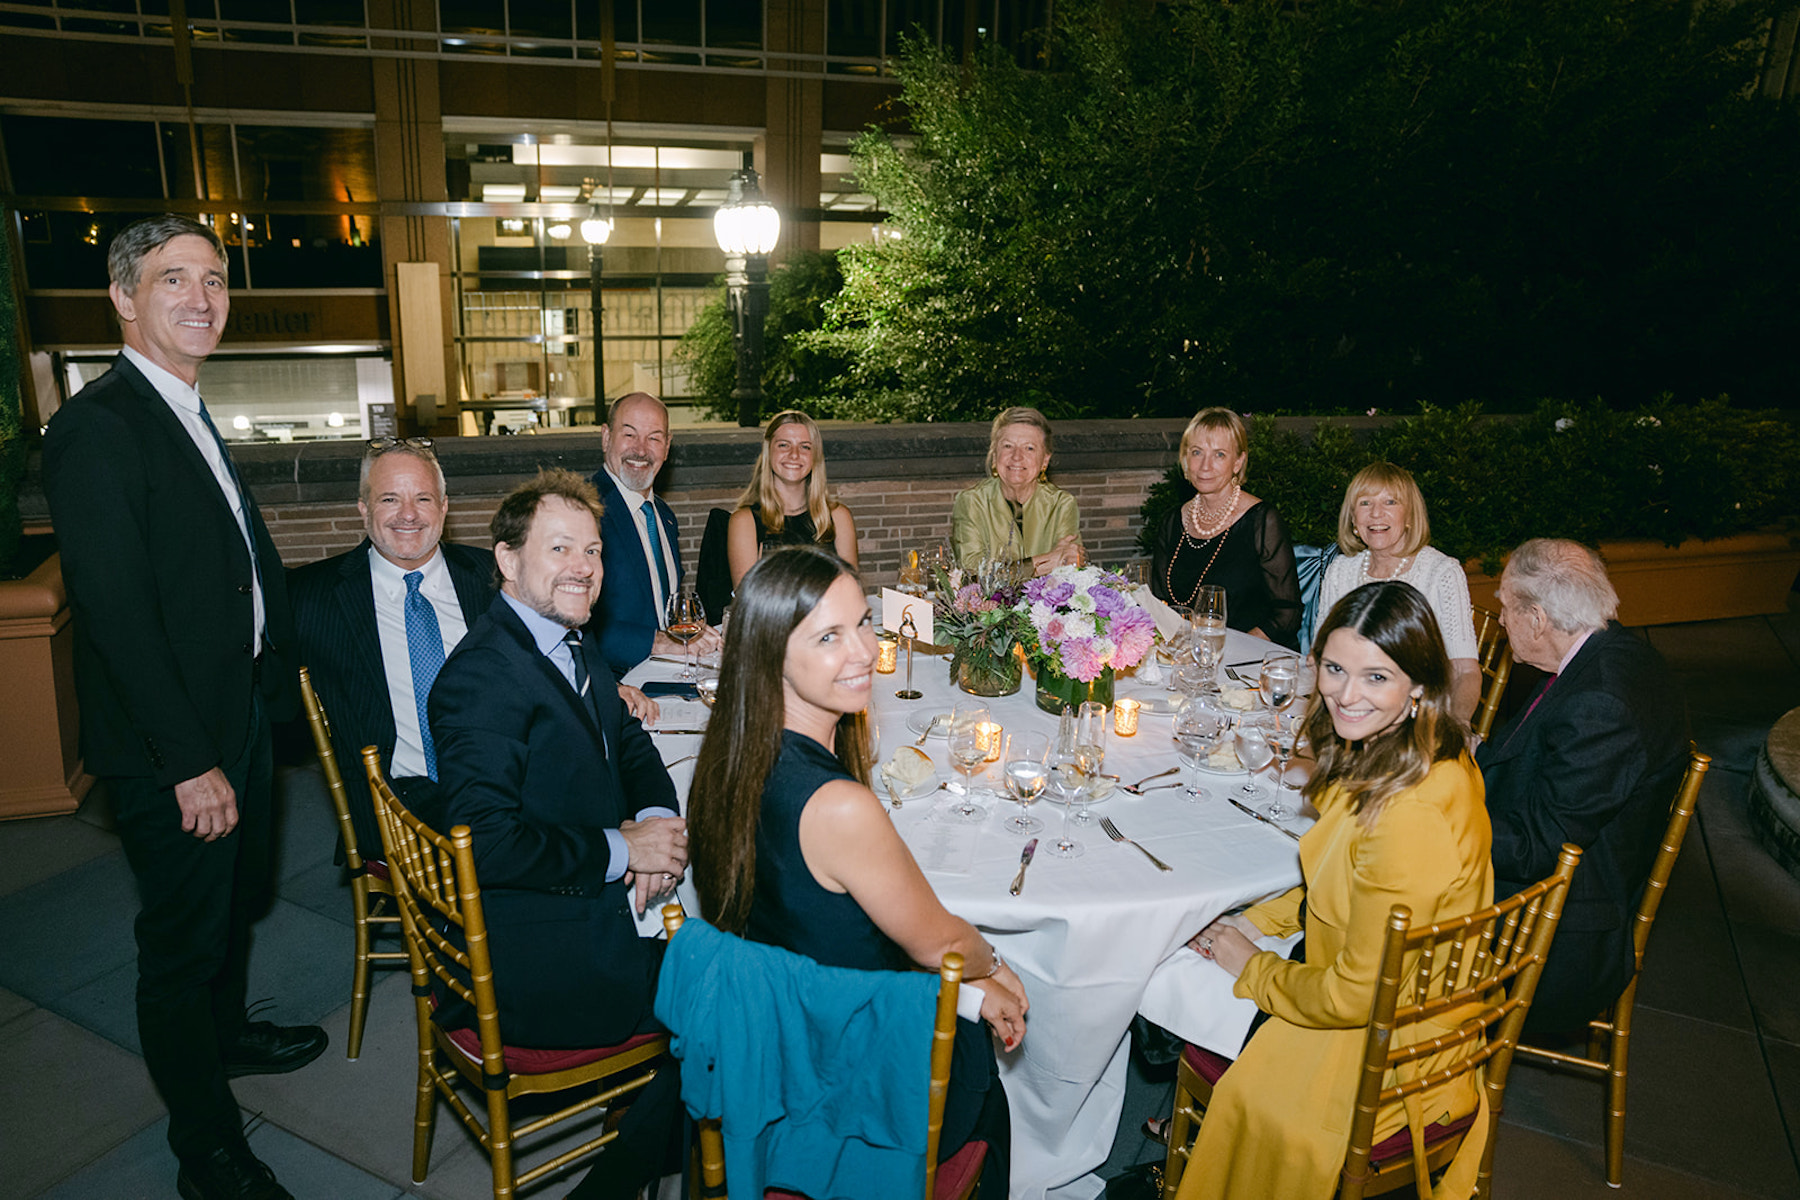 2021 Legacy Dinner honoring Nancy Goslee Power, photography by Klose Up Photography